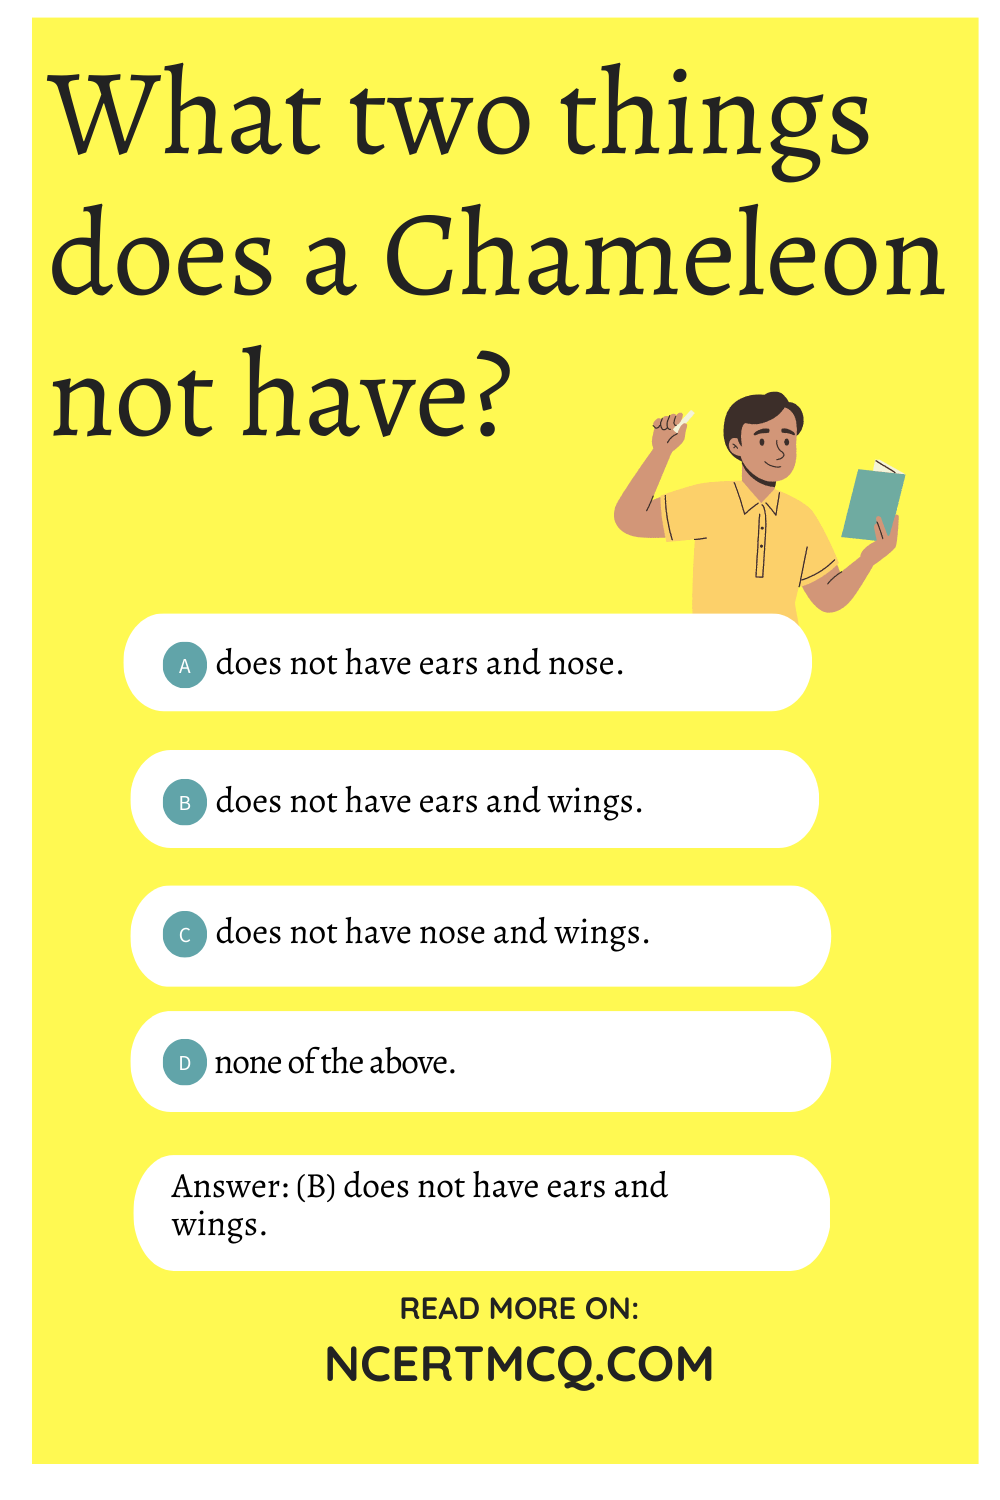 What two things does a Chameleon not have?